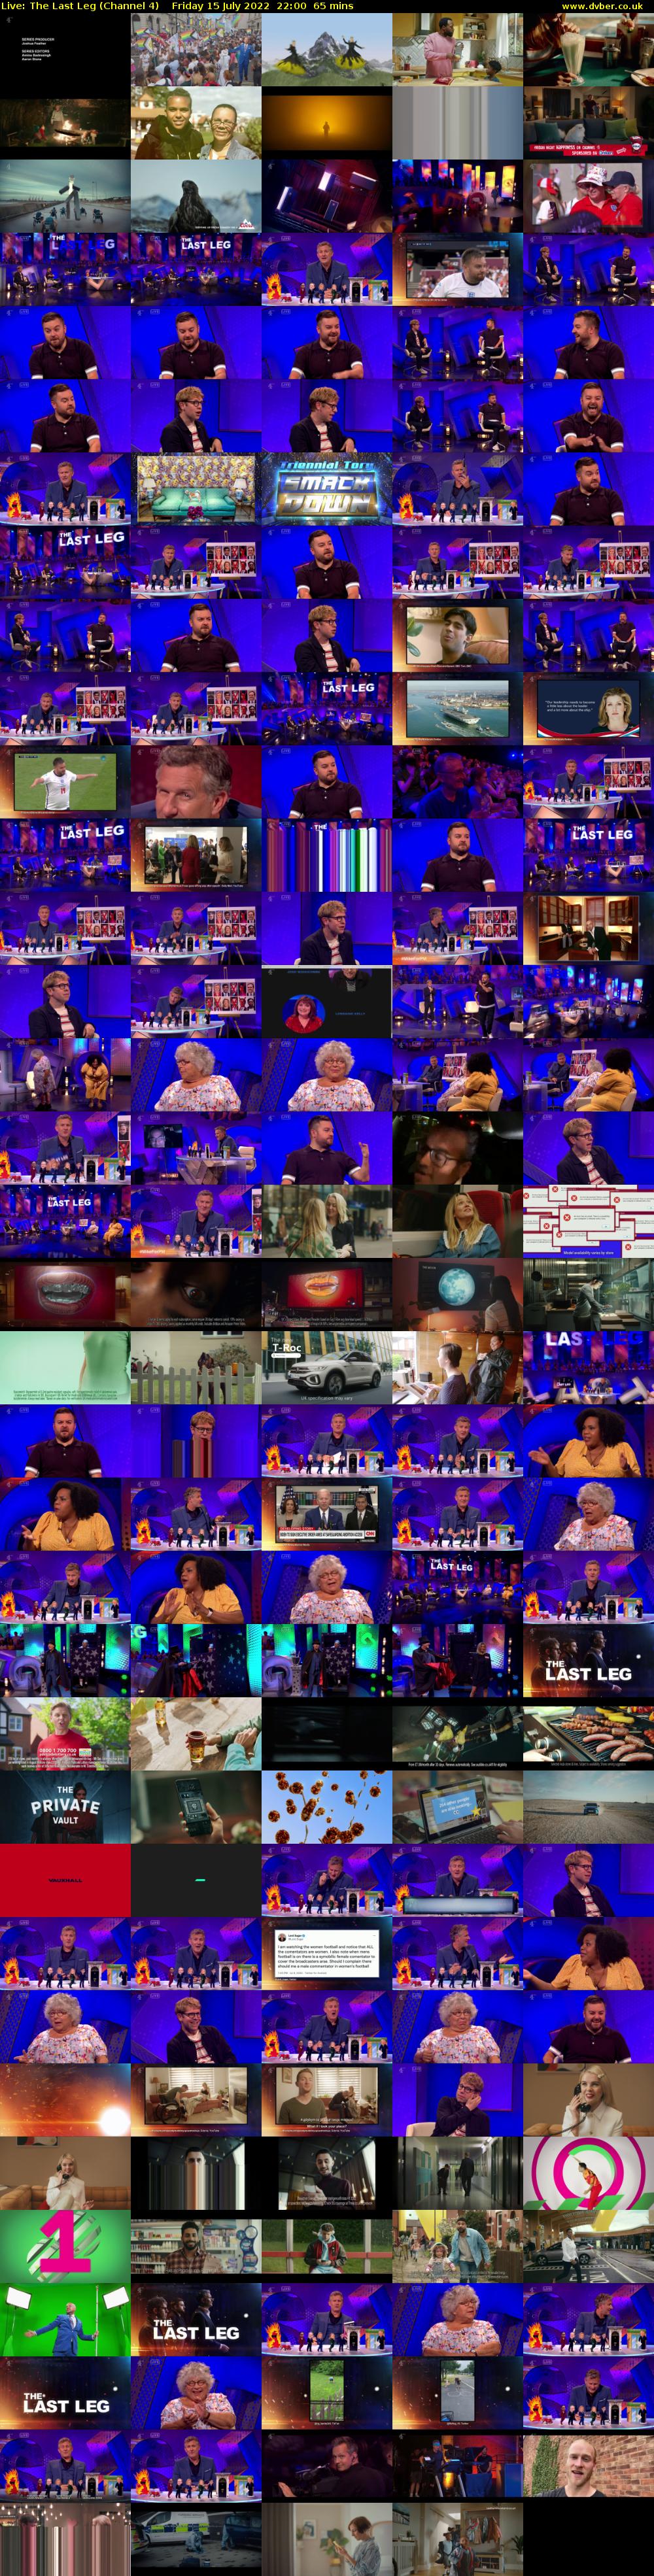 Live: The Last Leg (Channel 4) Friday 15 July 2022 22:00 - 23:05